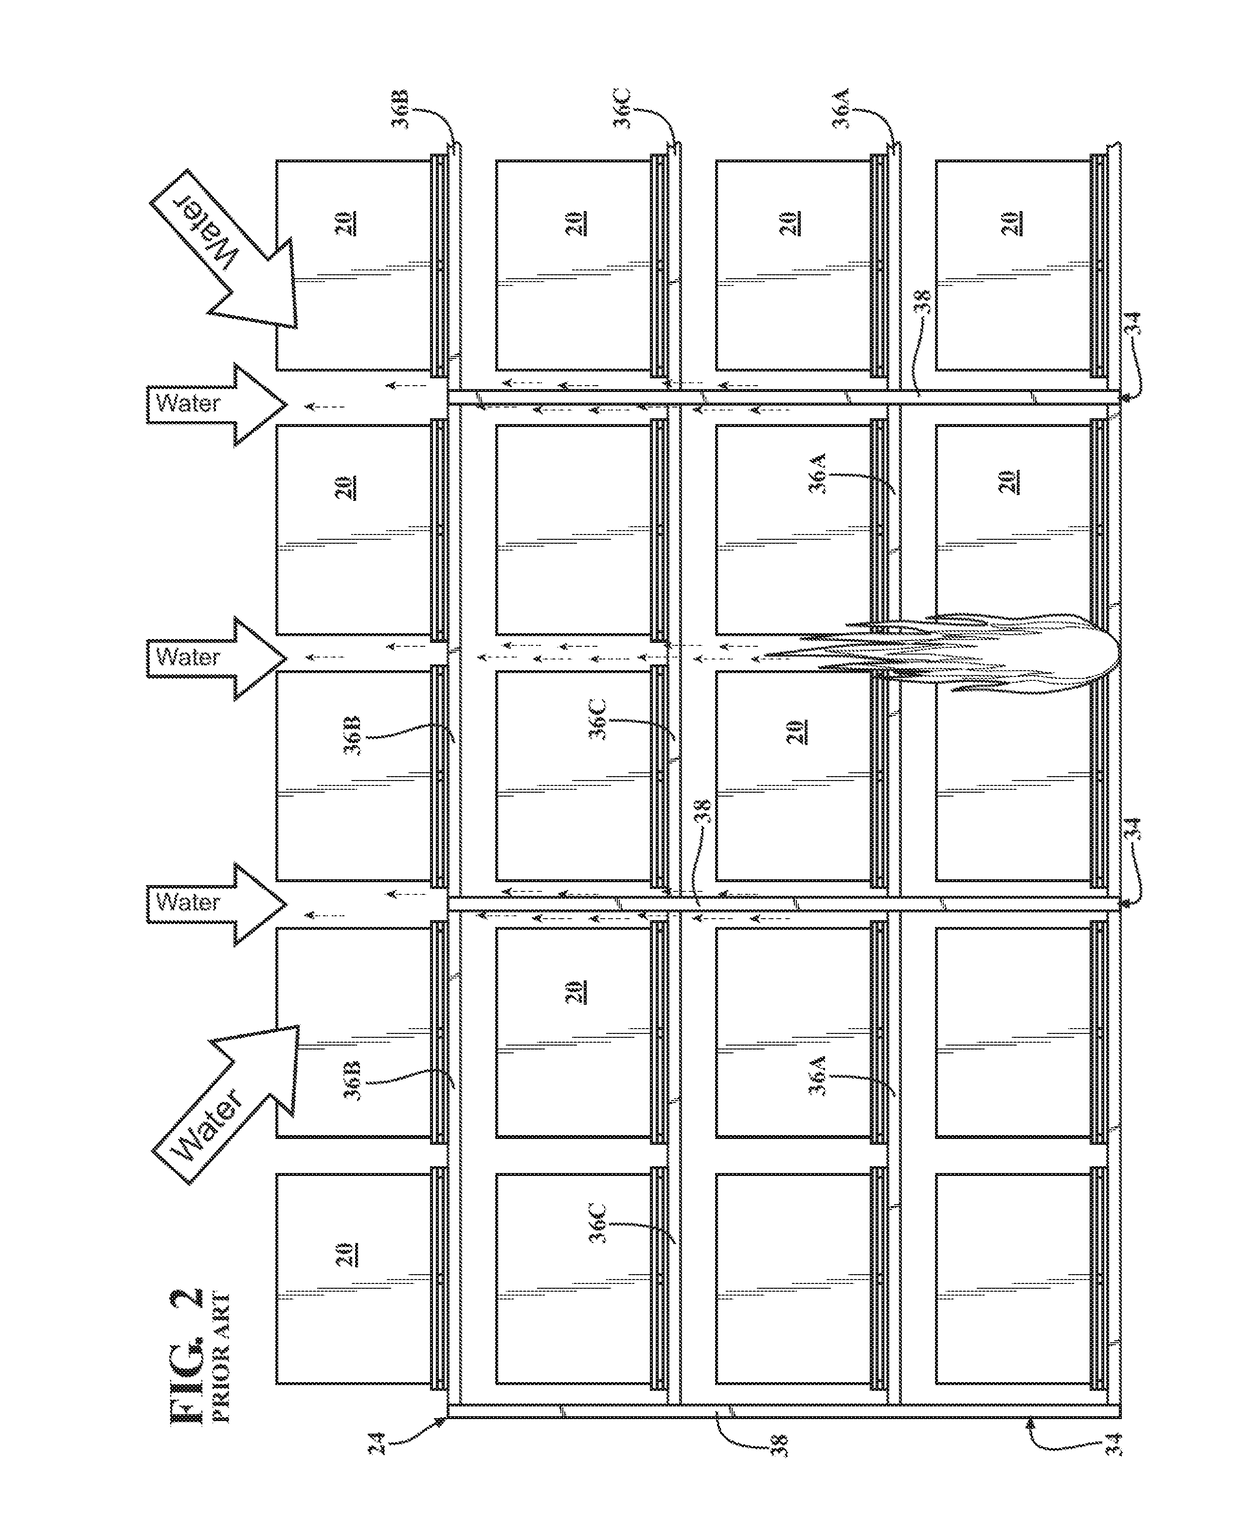 Water collecting pallet rack and method of fire protection